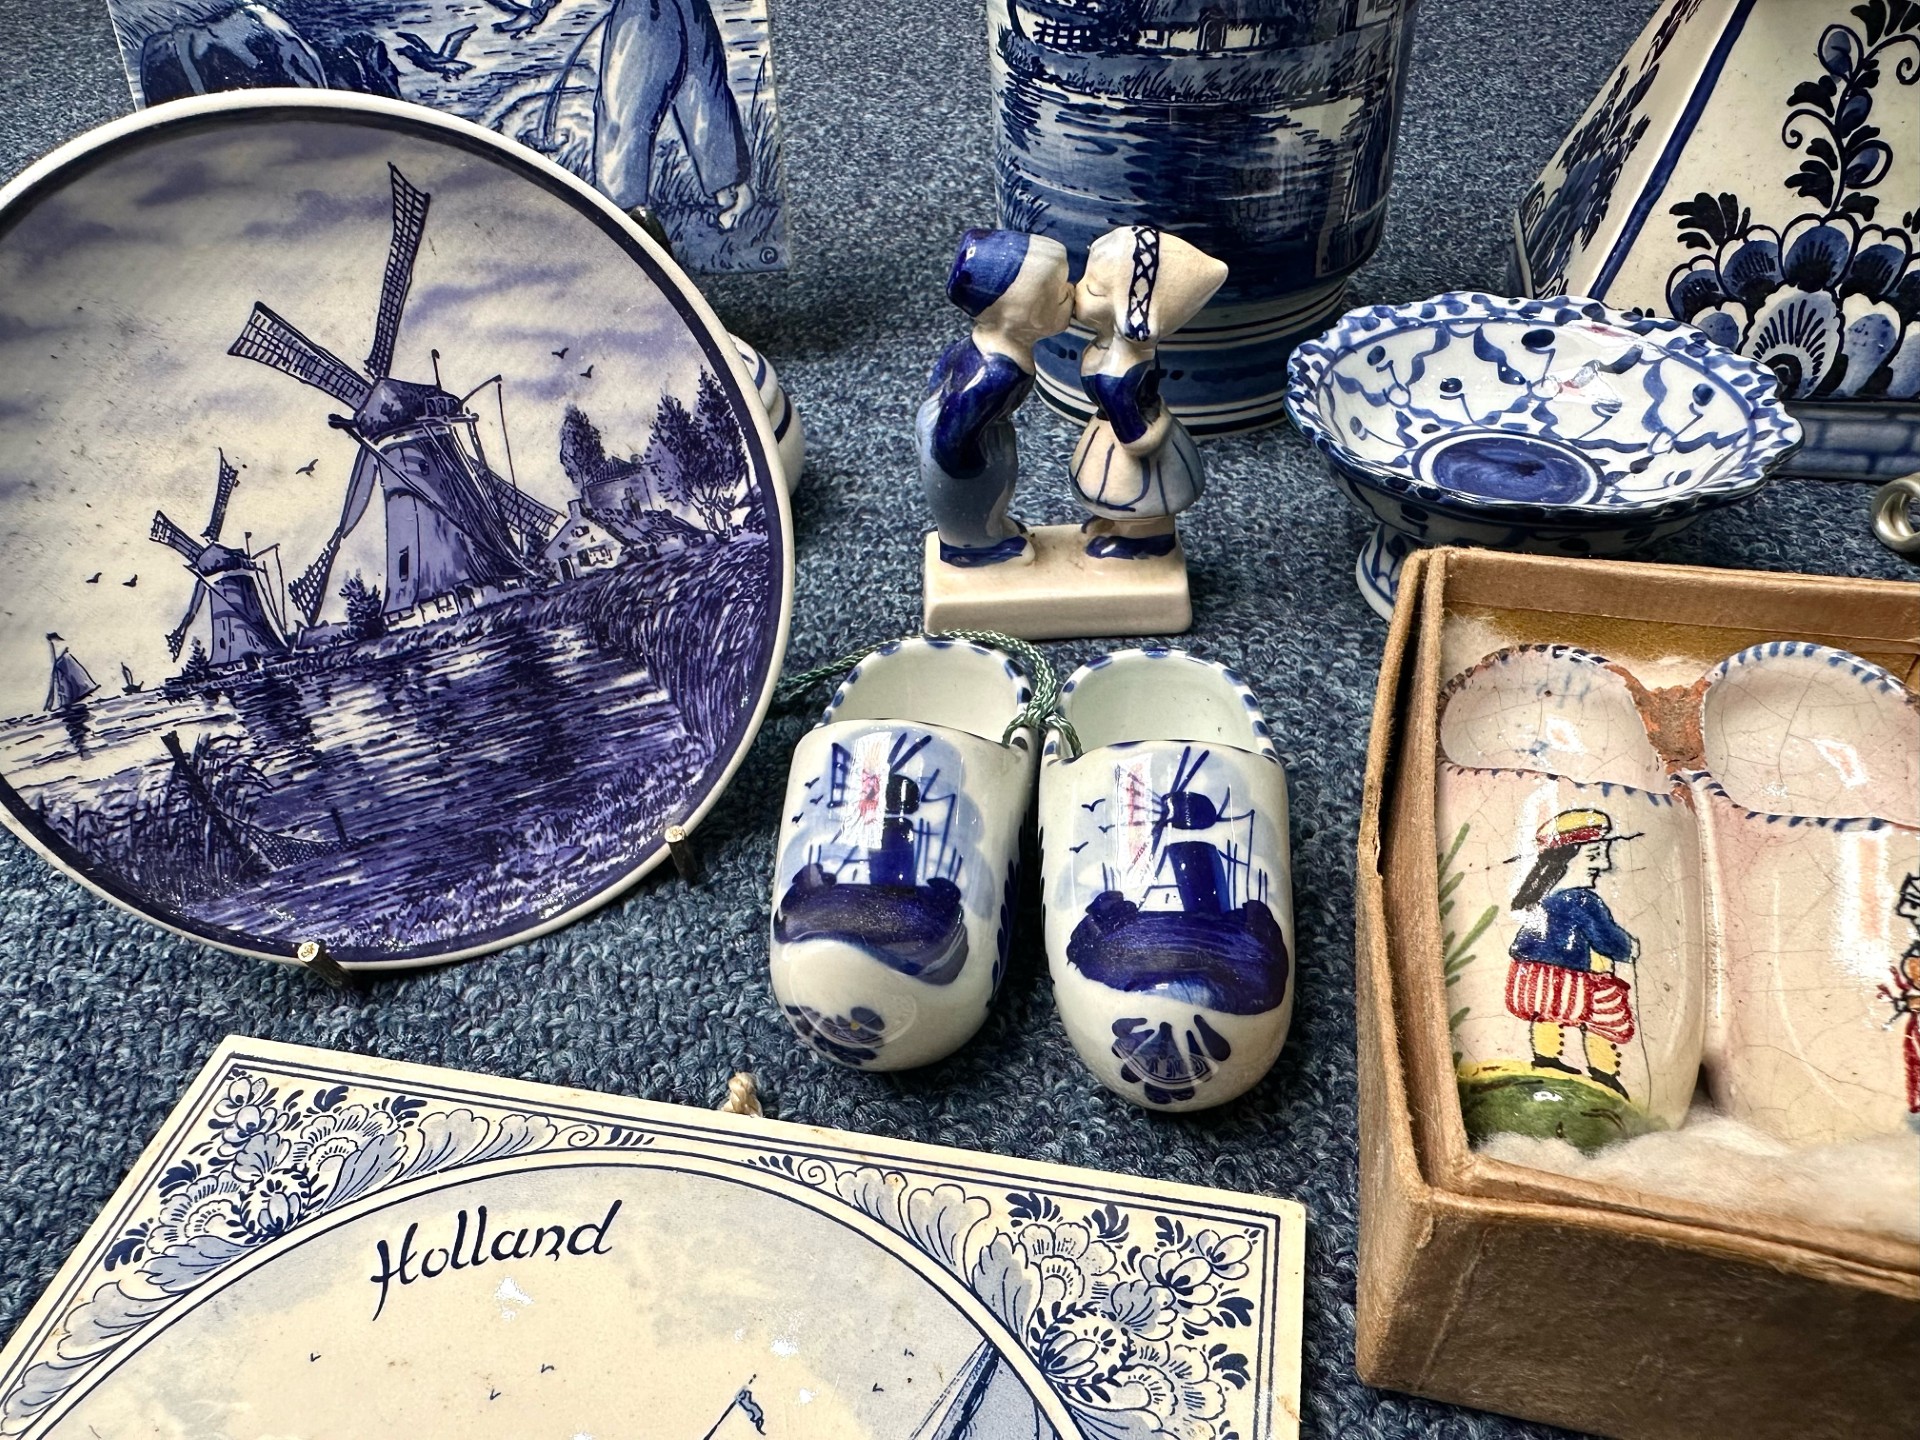 Collection of Delft Dutch Blue & White Pottery, including a large windmill, vase, clogs, trinket - Image 3 of 3